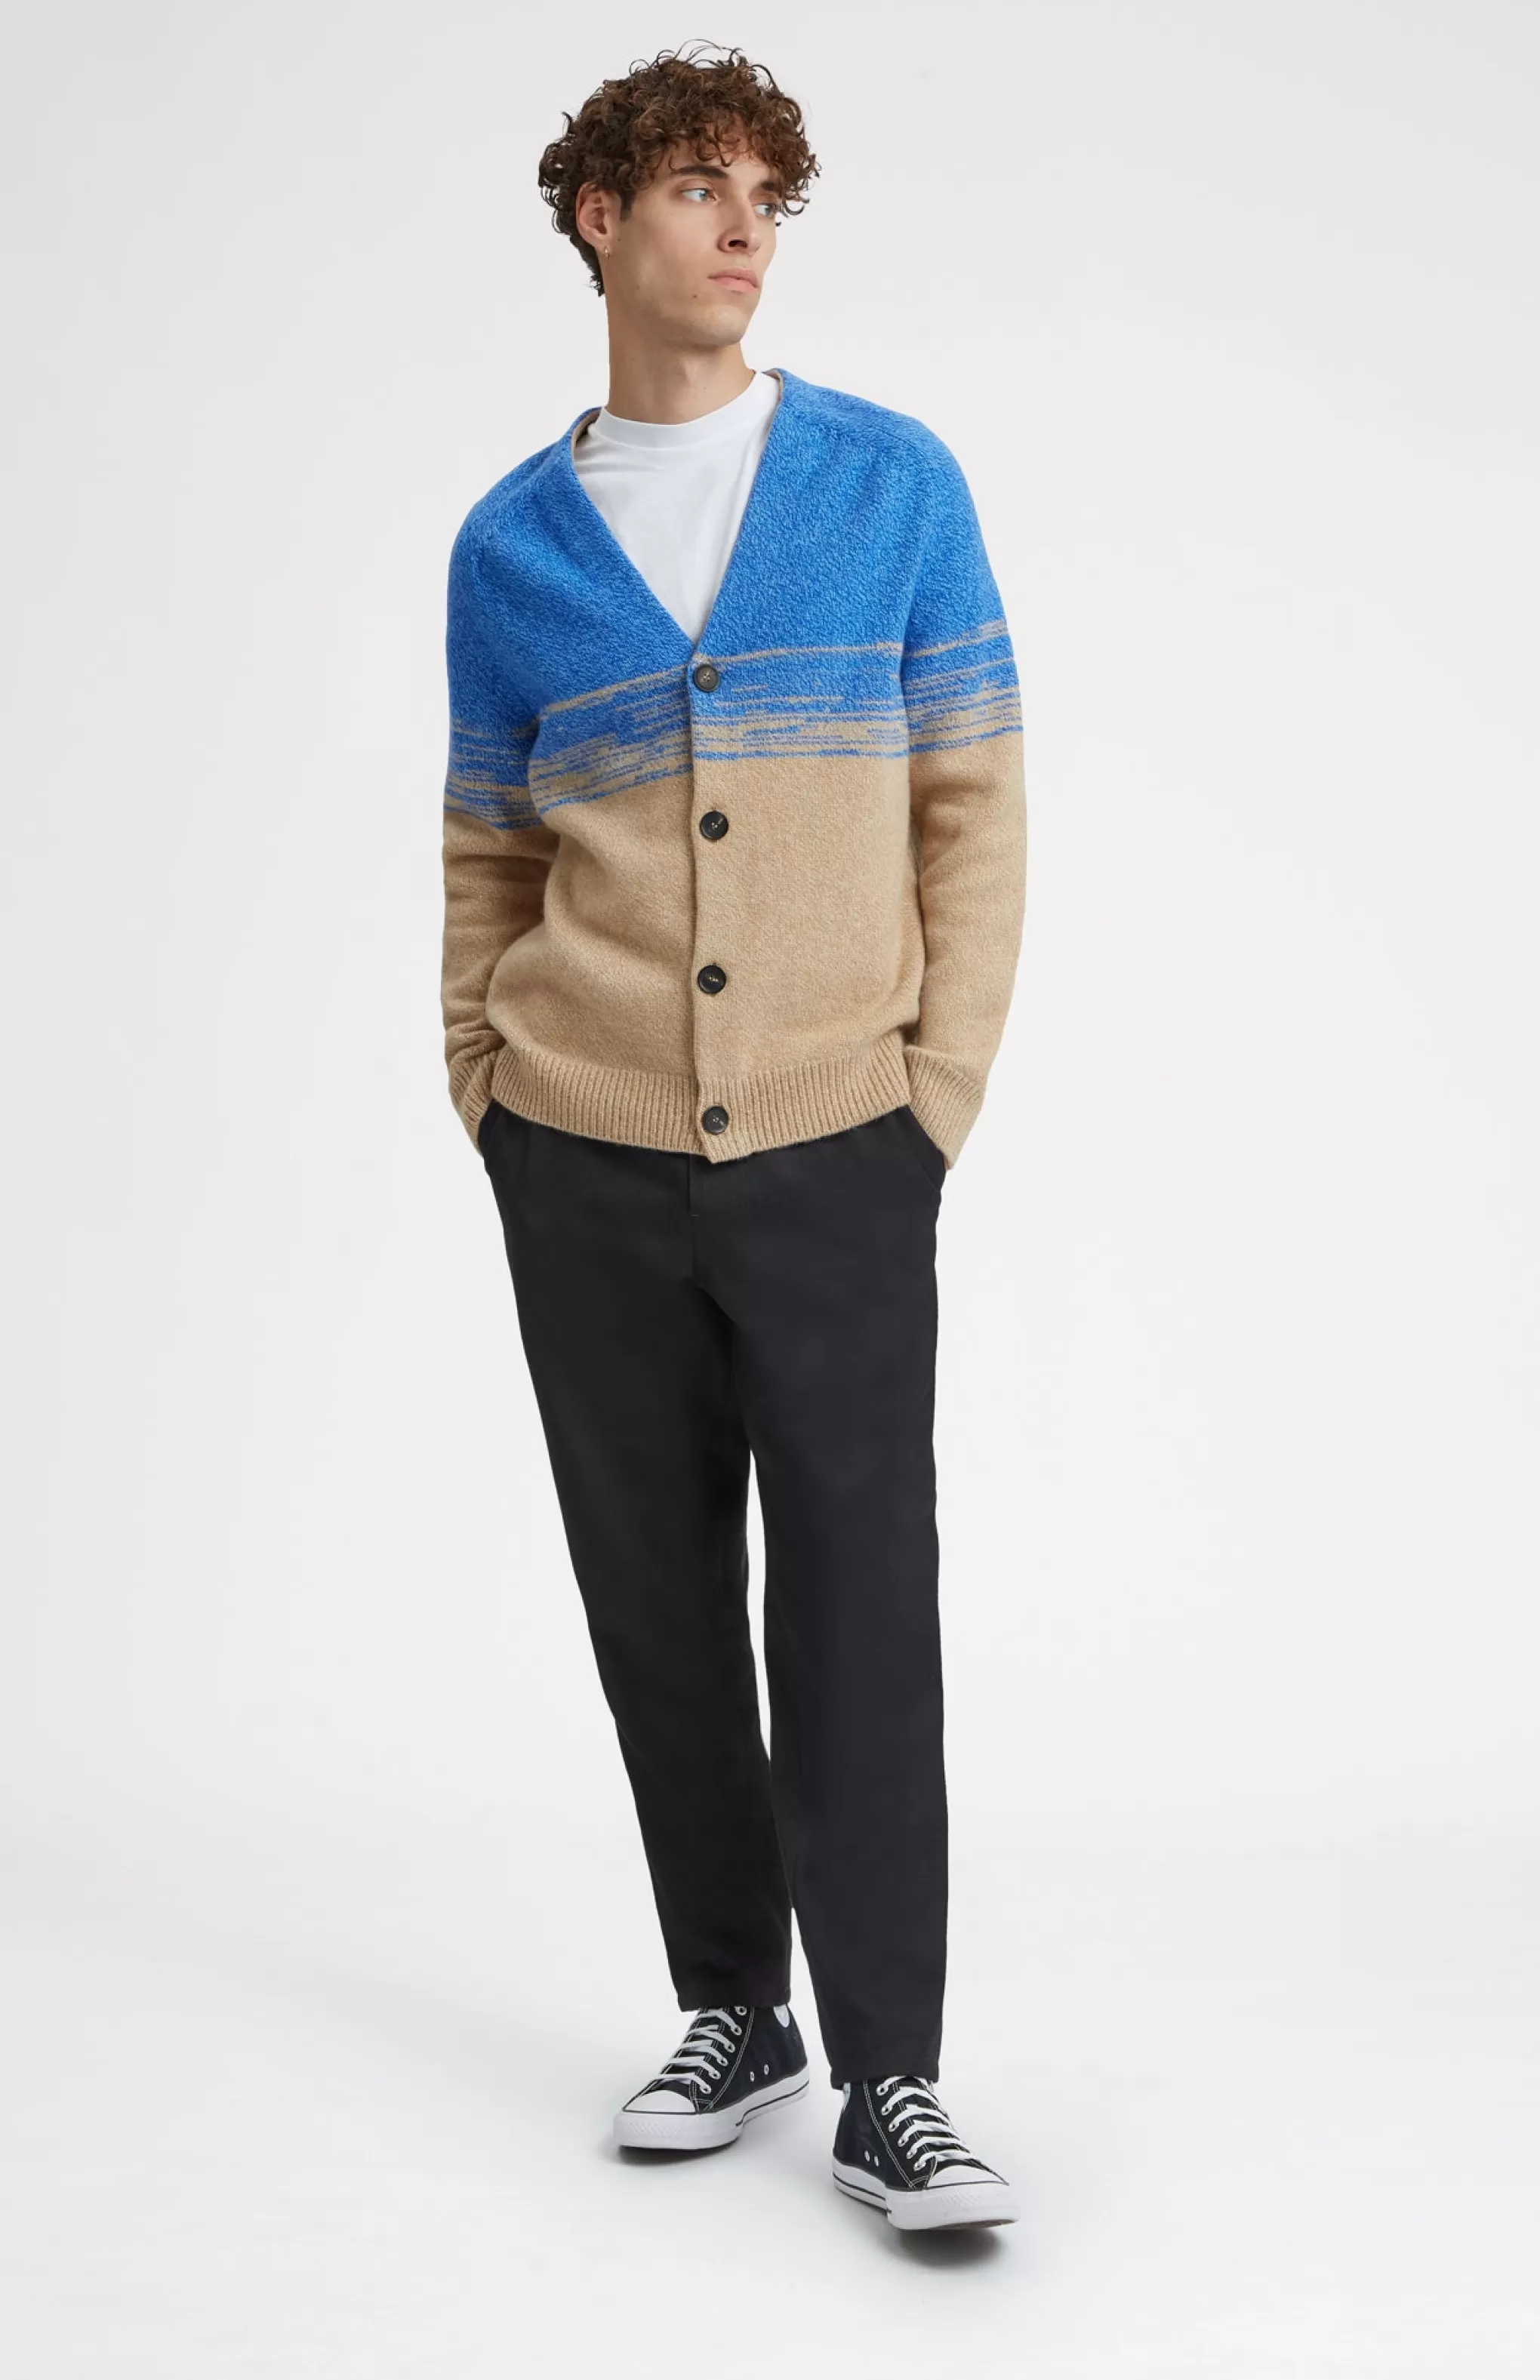 Flash Sale V Neck Lambswool Cardigan With Degrade Effect In Cobalt And Camel Men Heavy Weight Knits